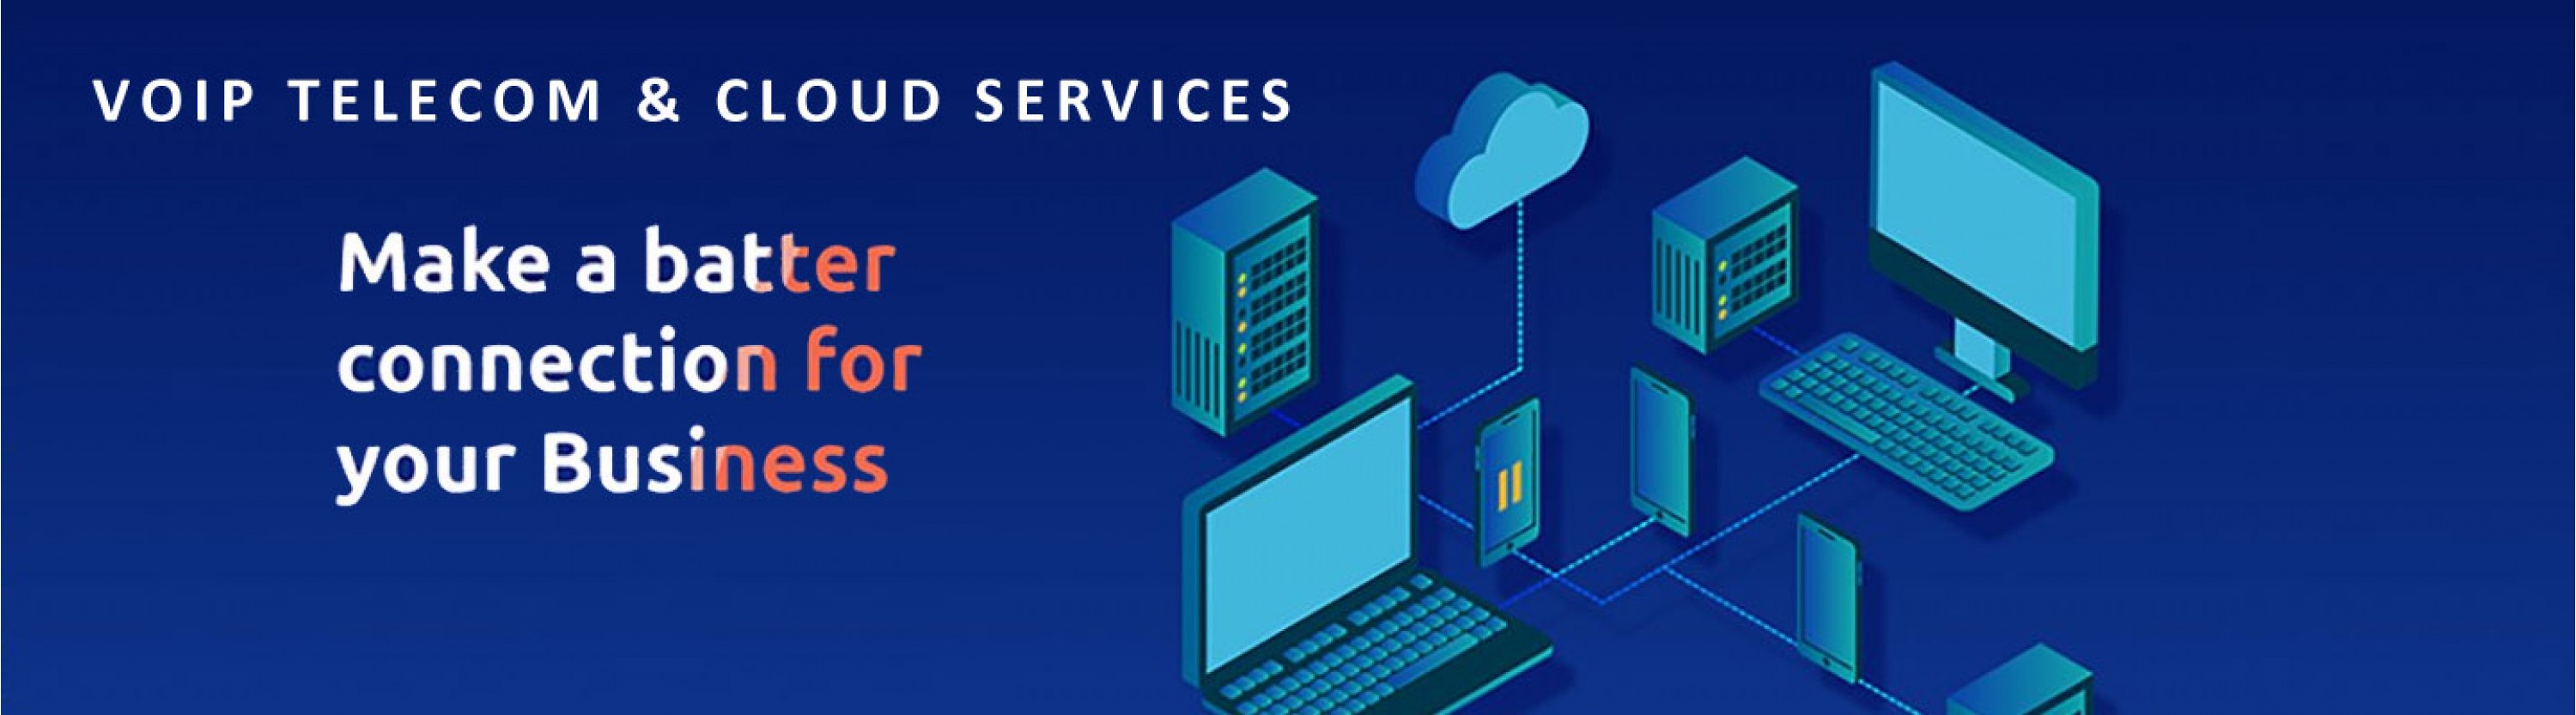 Voip Telecom and Cloud Services